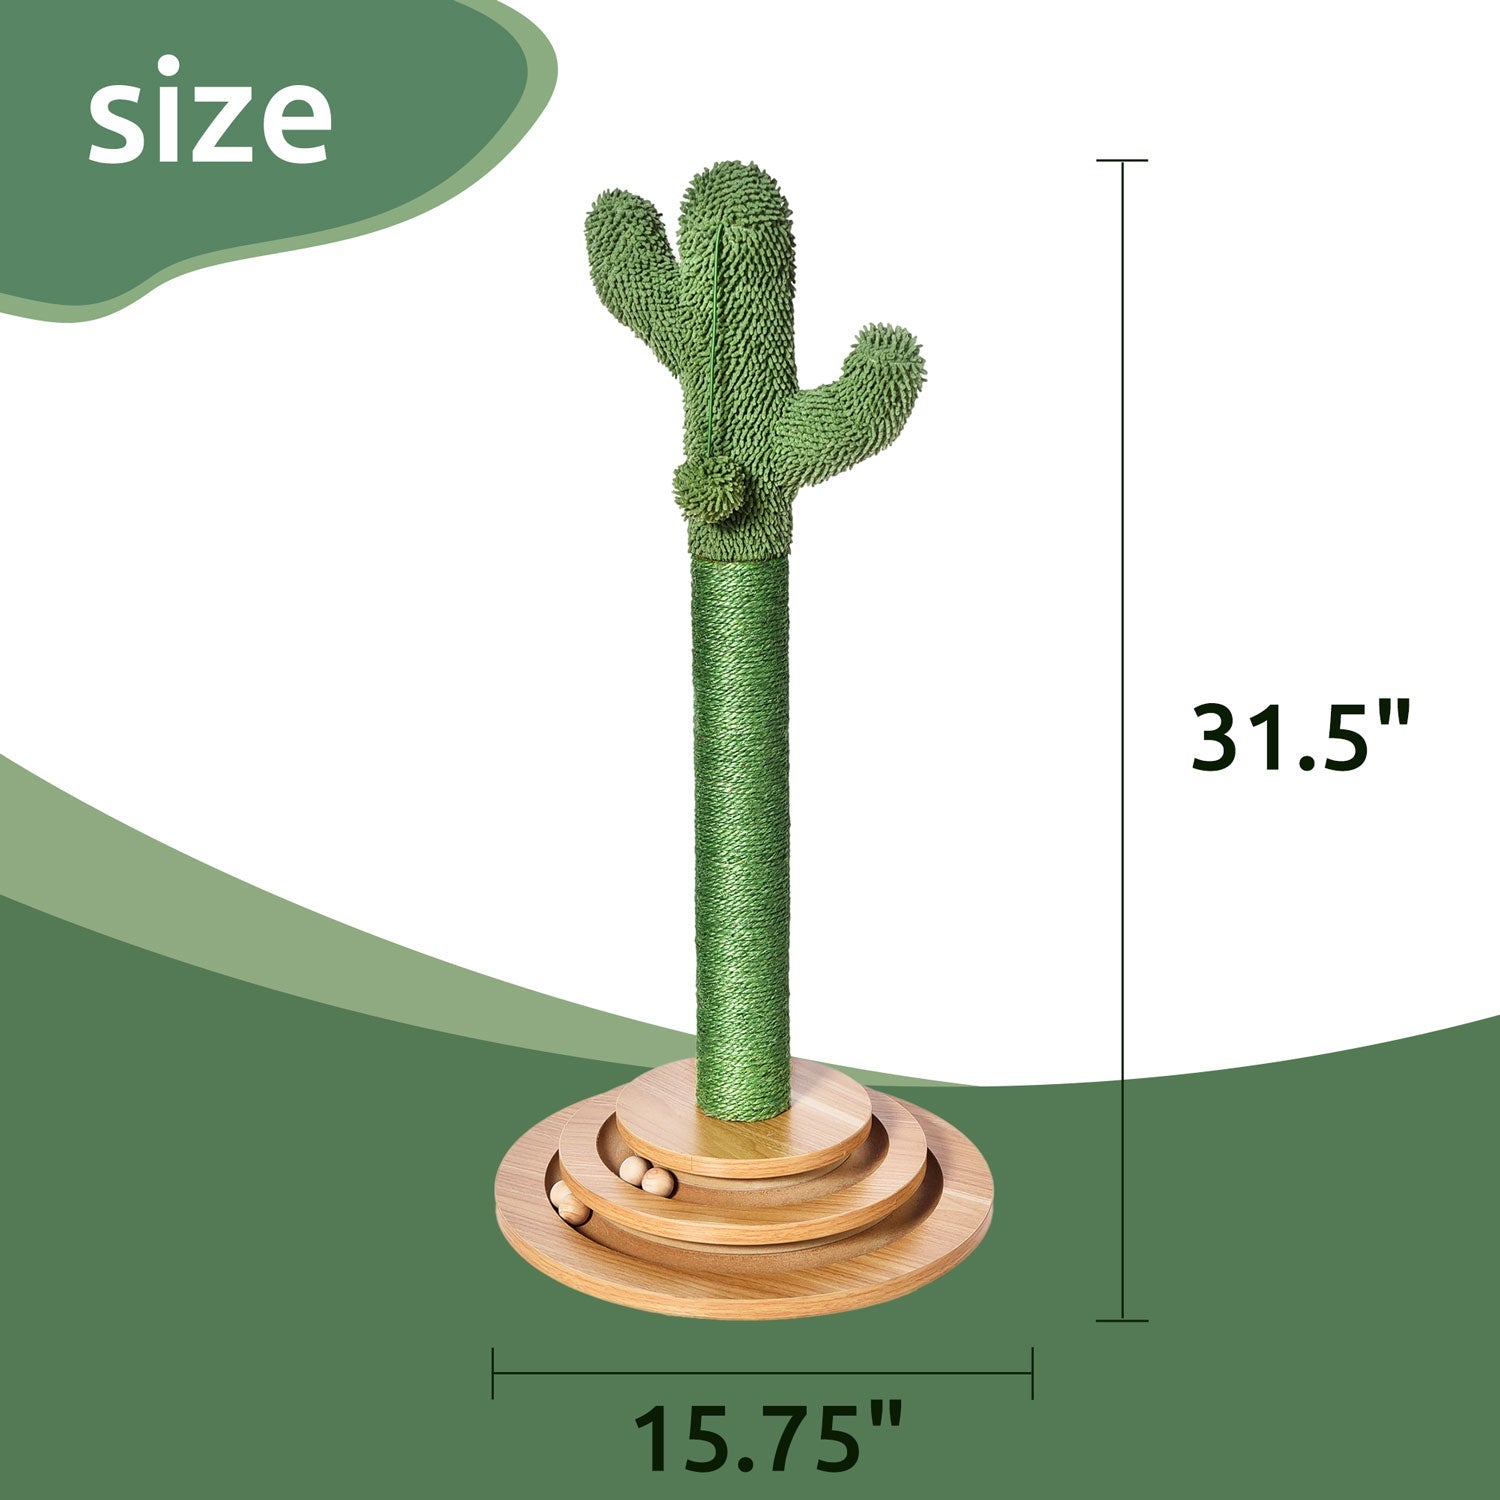 2-in-1 Cactus Cat Scraching Post with Ball Track Toy